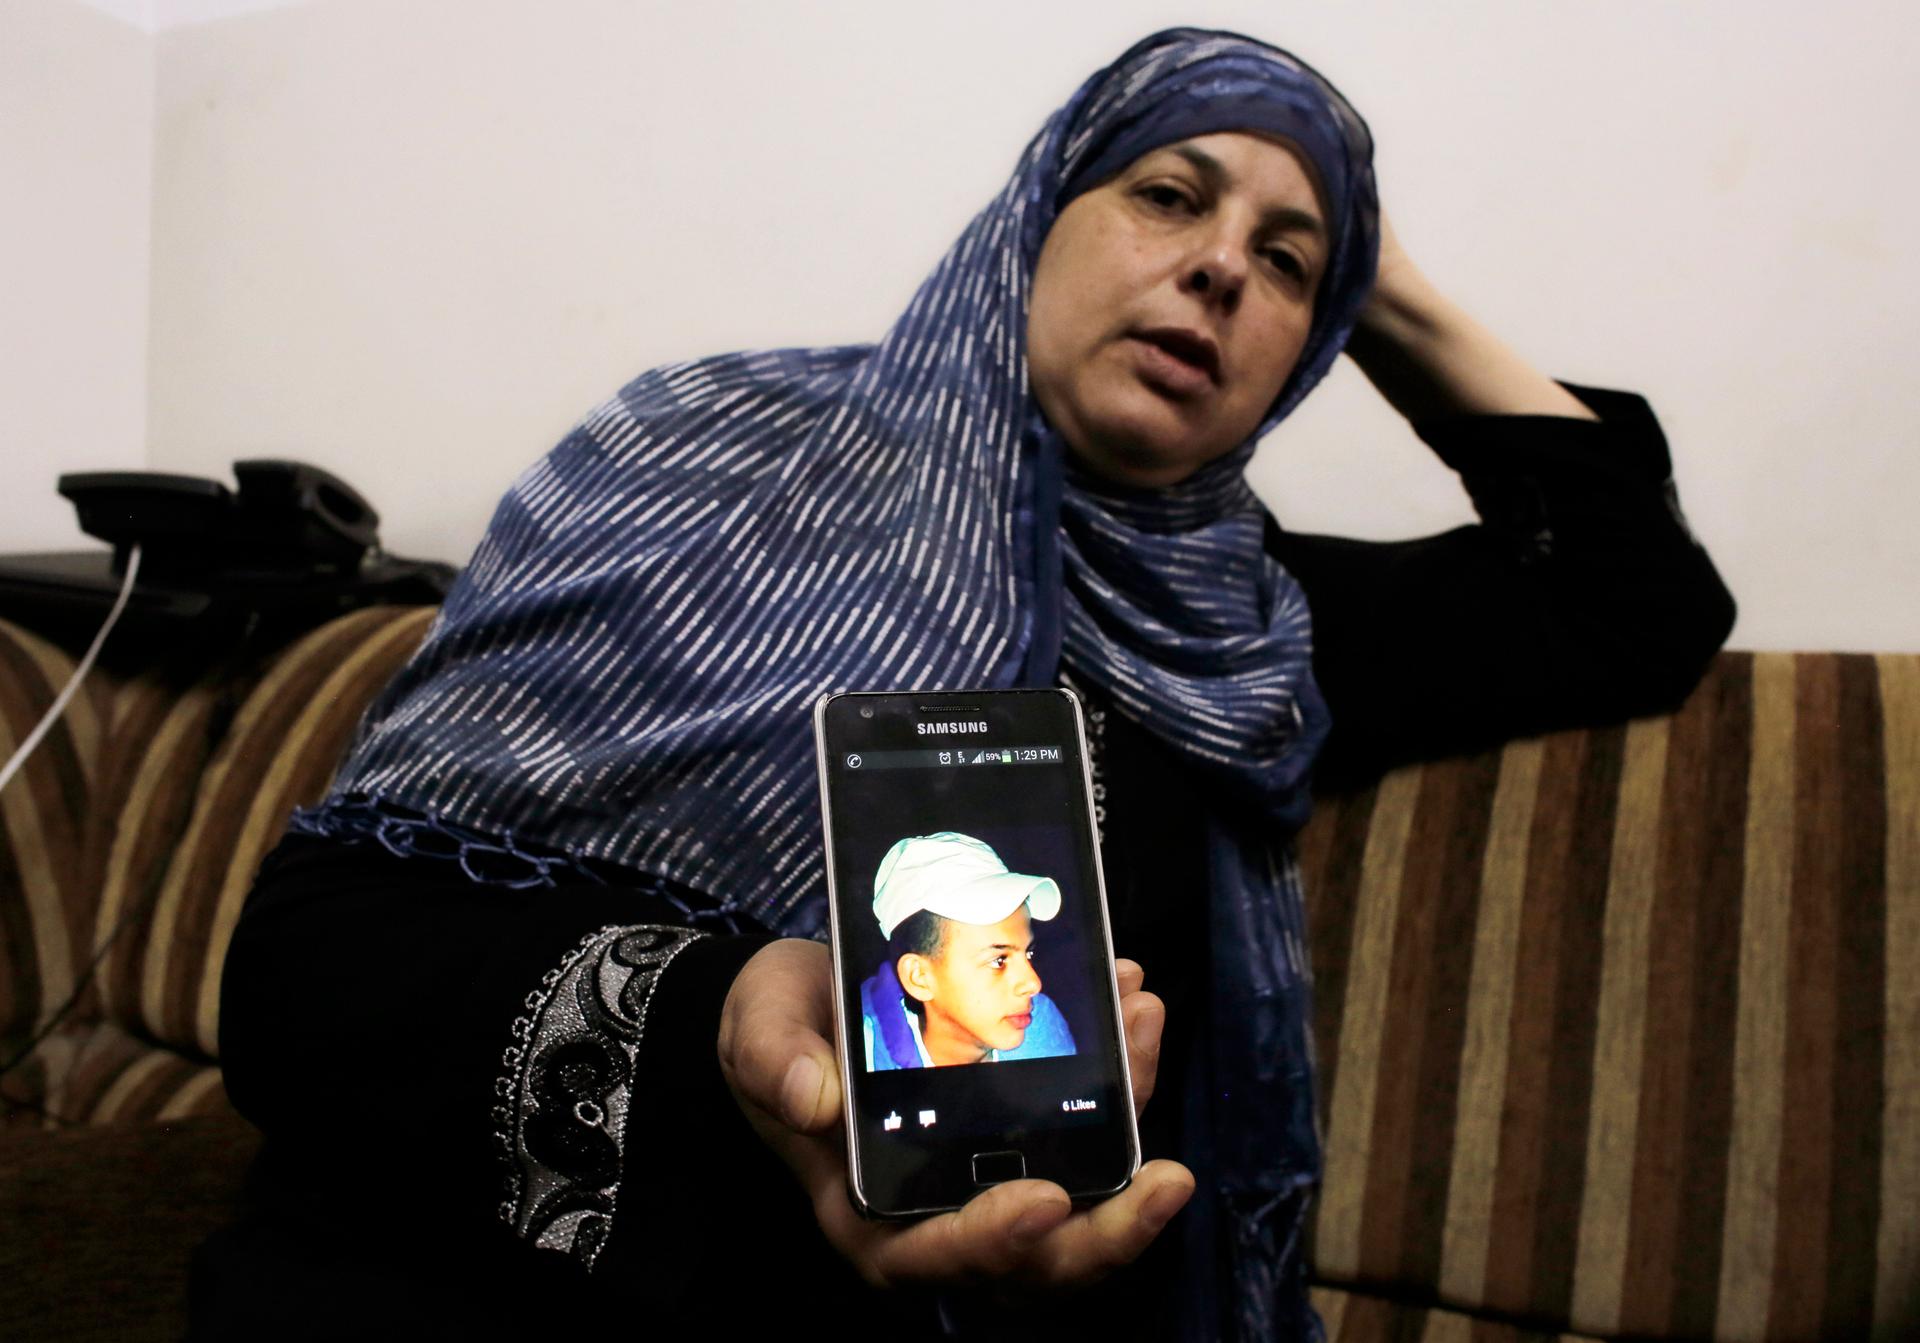 Suha, mother of 16 year-old Mohammed Abu Khudair, shows a picture of her son on her mobile phone at their home in Shuafat, an Arab suburb of Jerusalem. News of the discovery of Mohammed's body sparked clashes on Wednesday between rock-throwing Palestinian